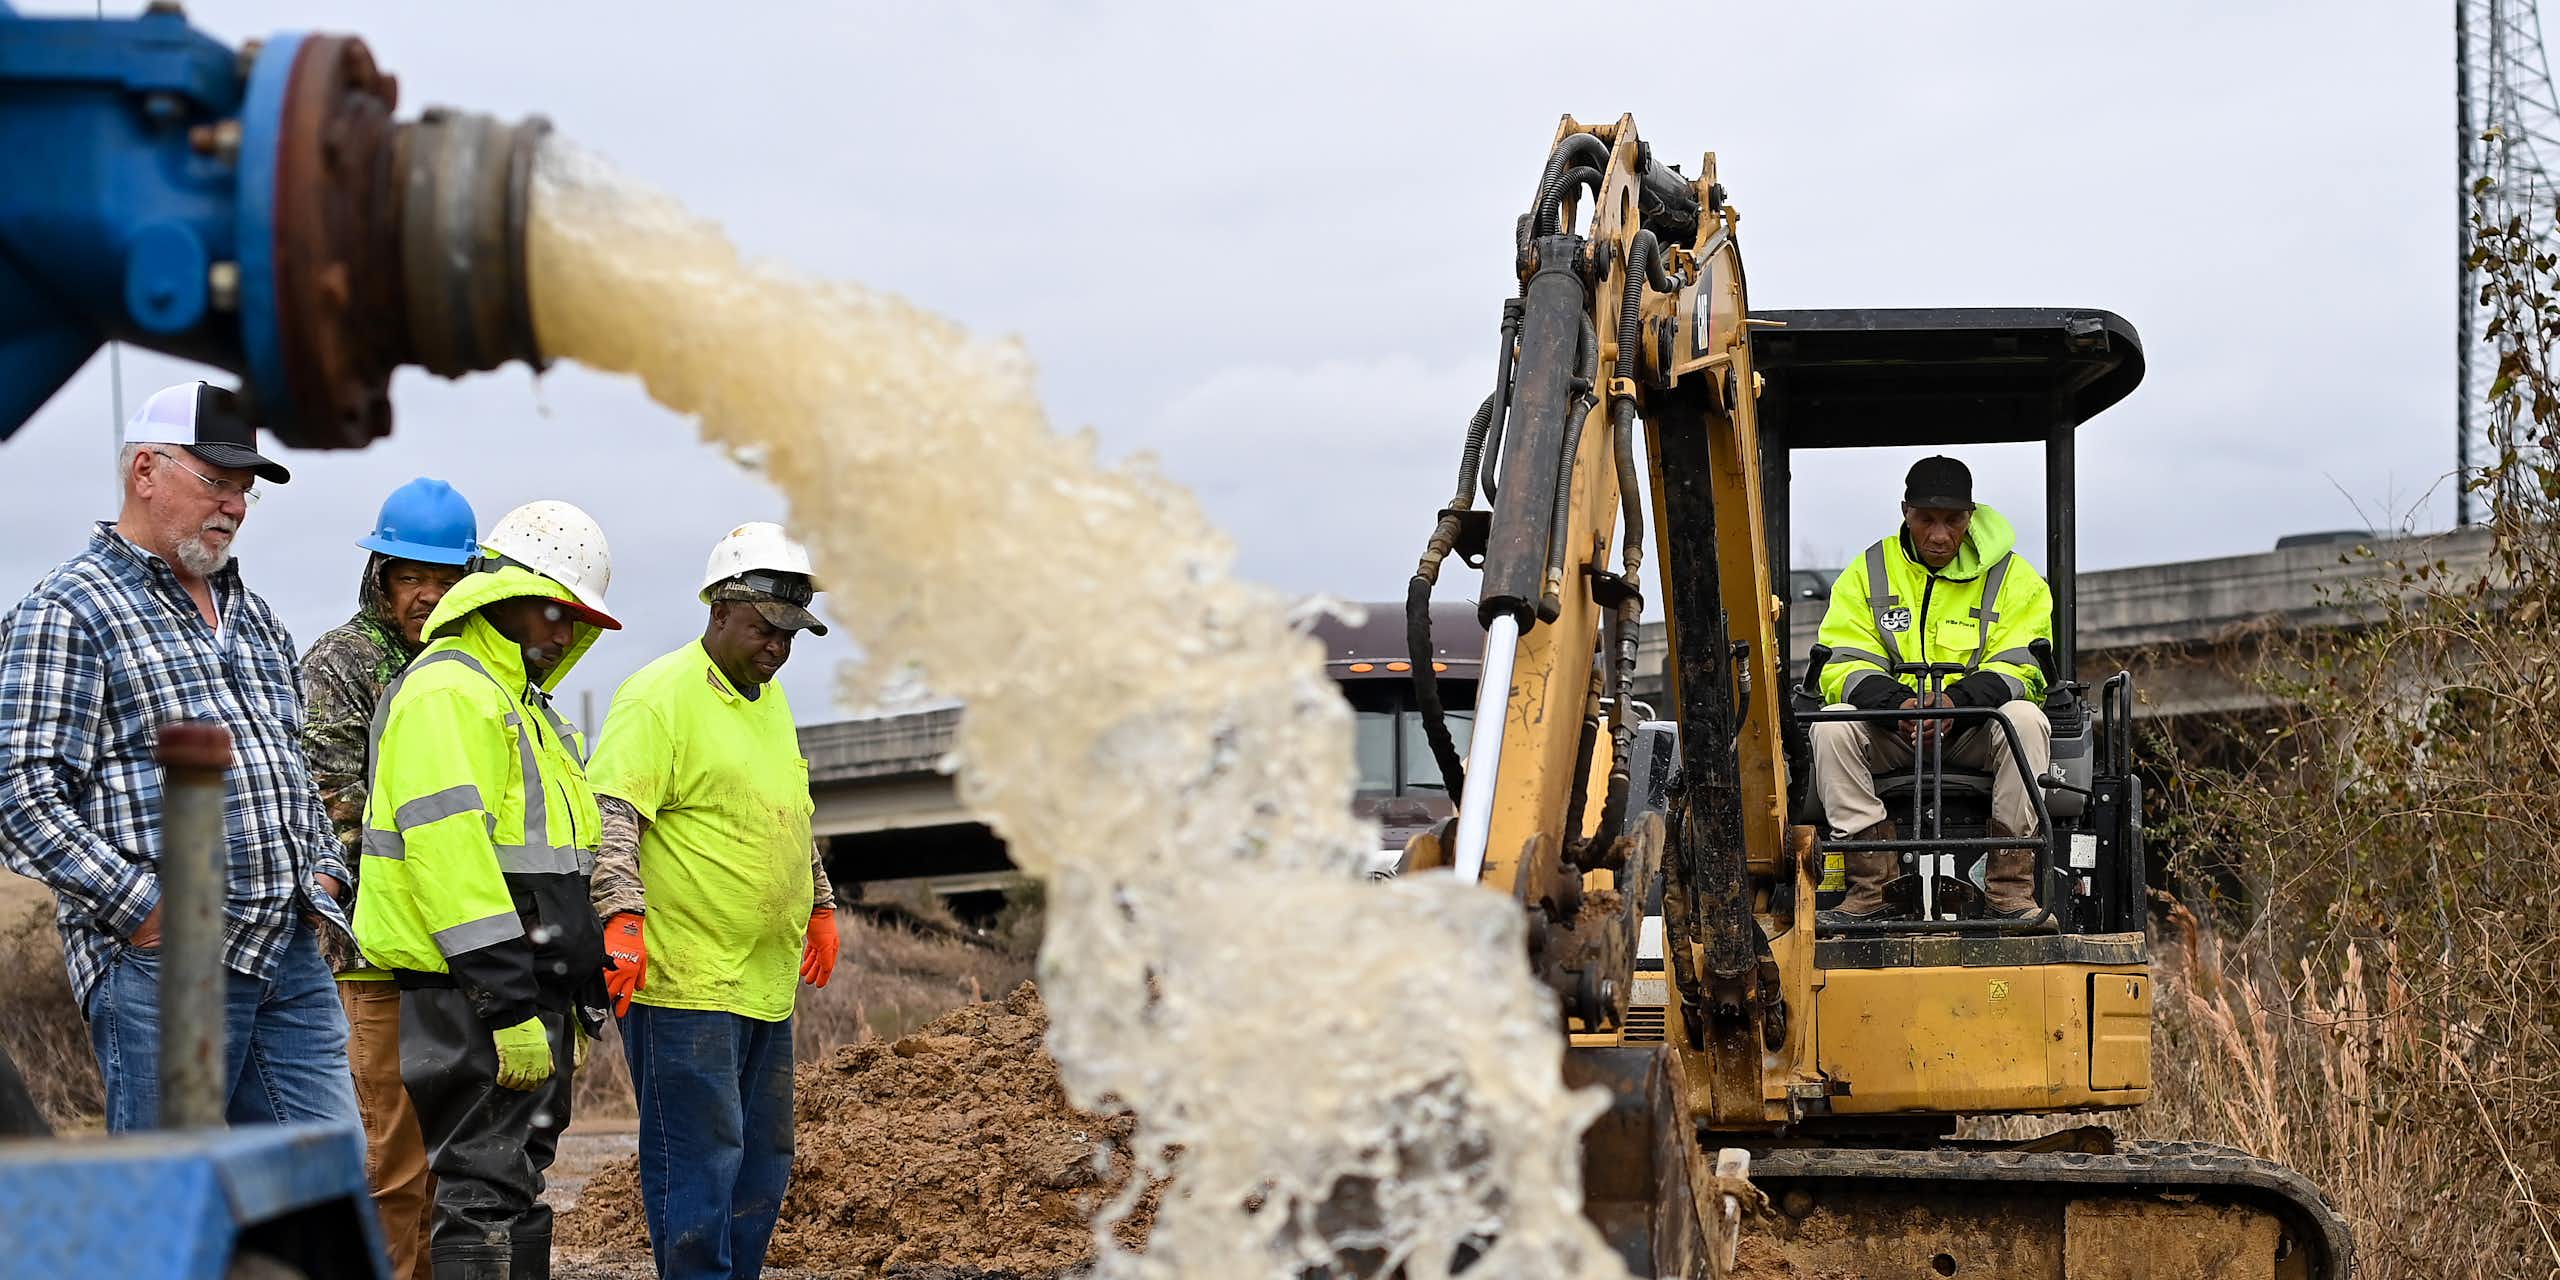 Water gushes from a pipe draining a work area as workers try to figure out how to fix a broken water main.